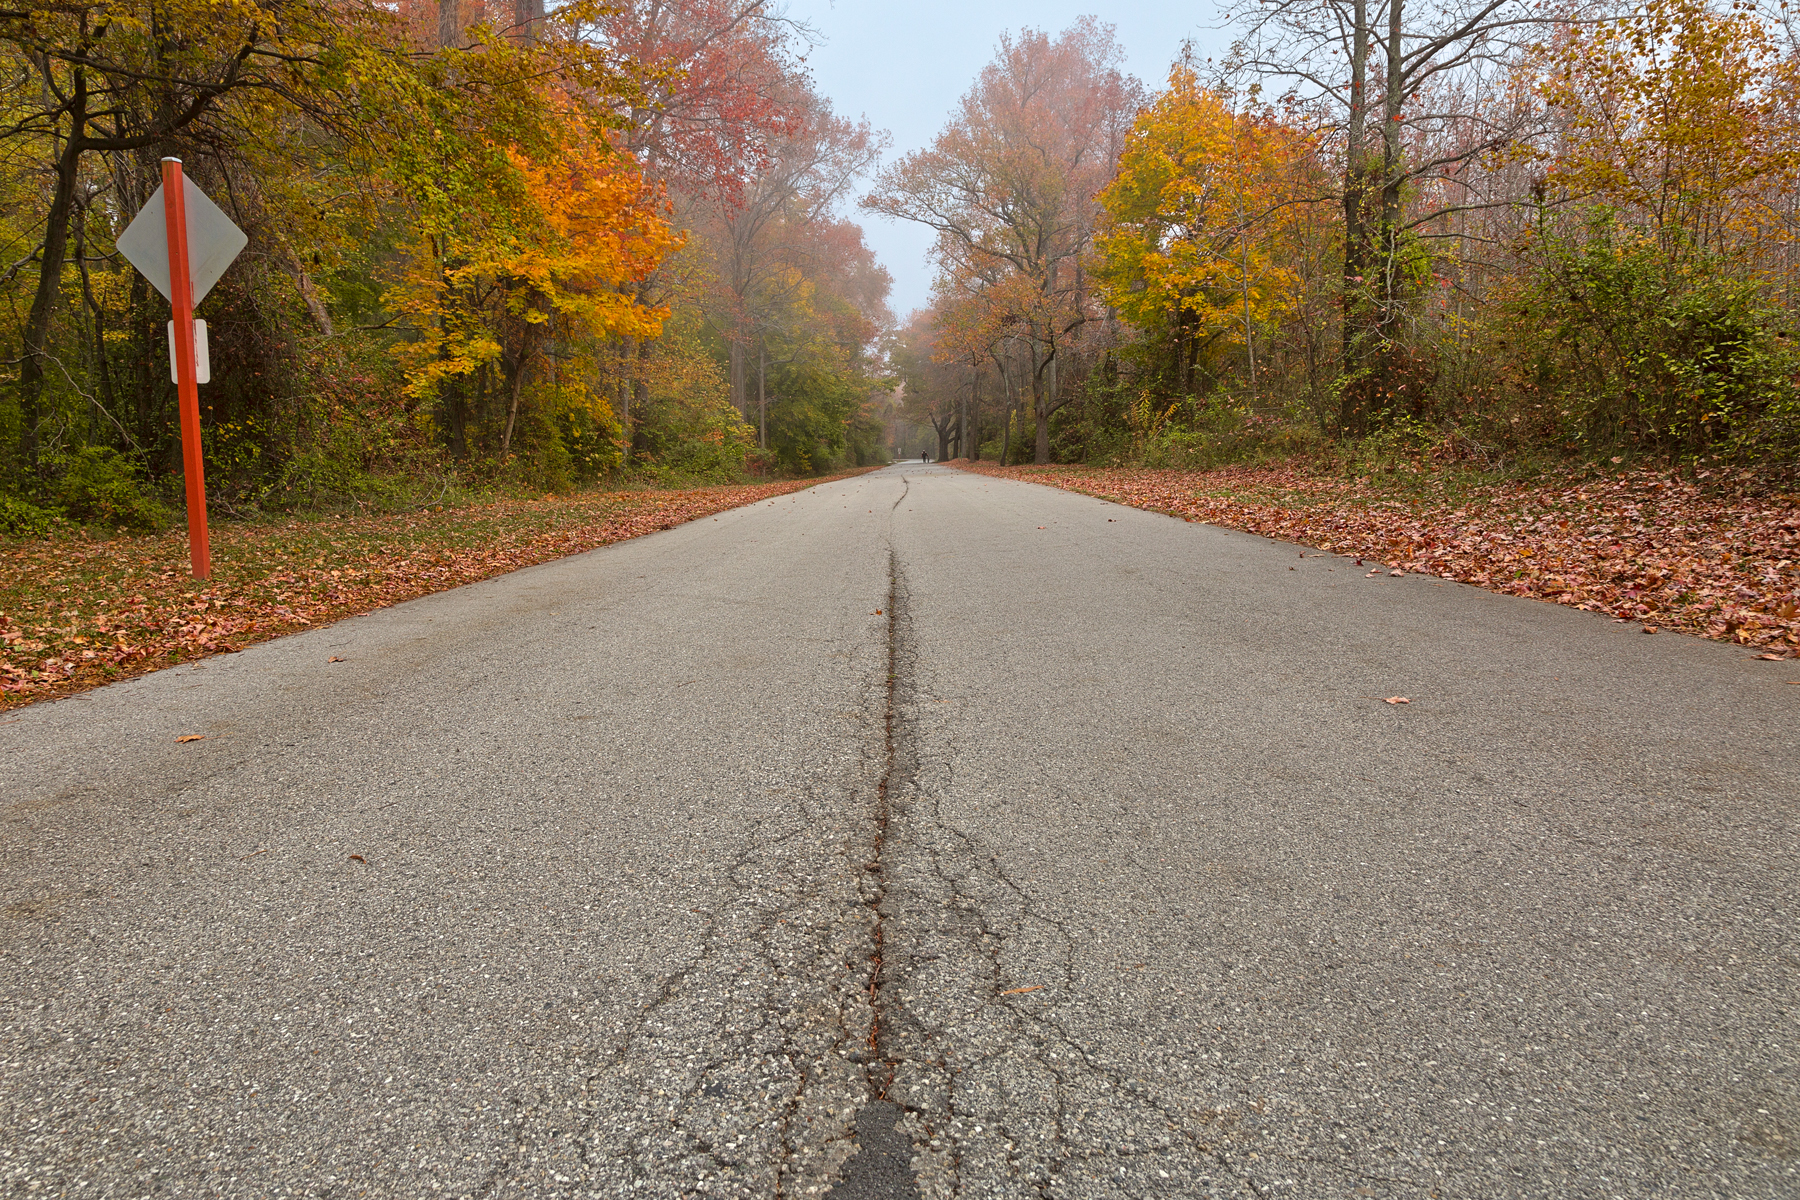 Misty fall road - hdr photo